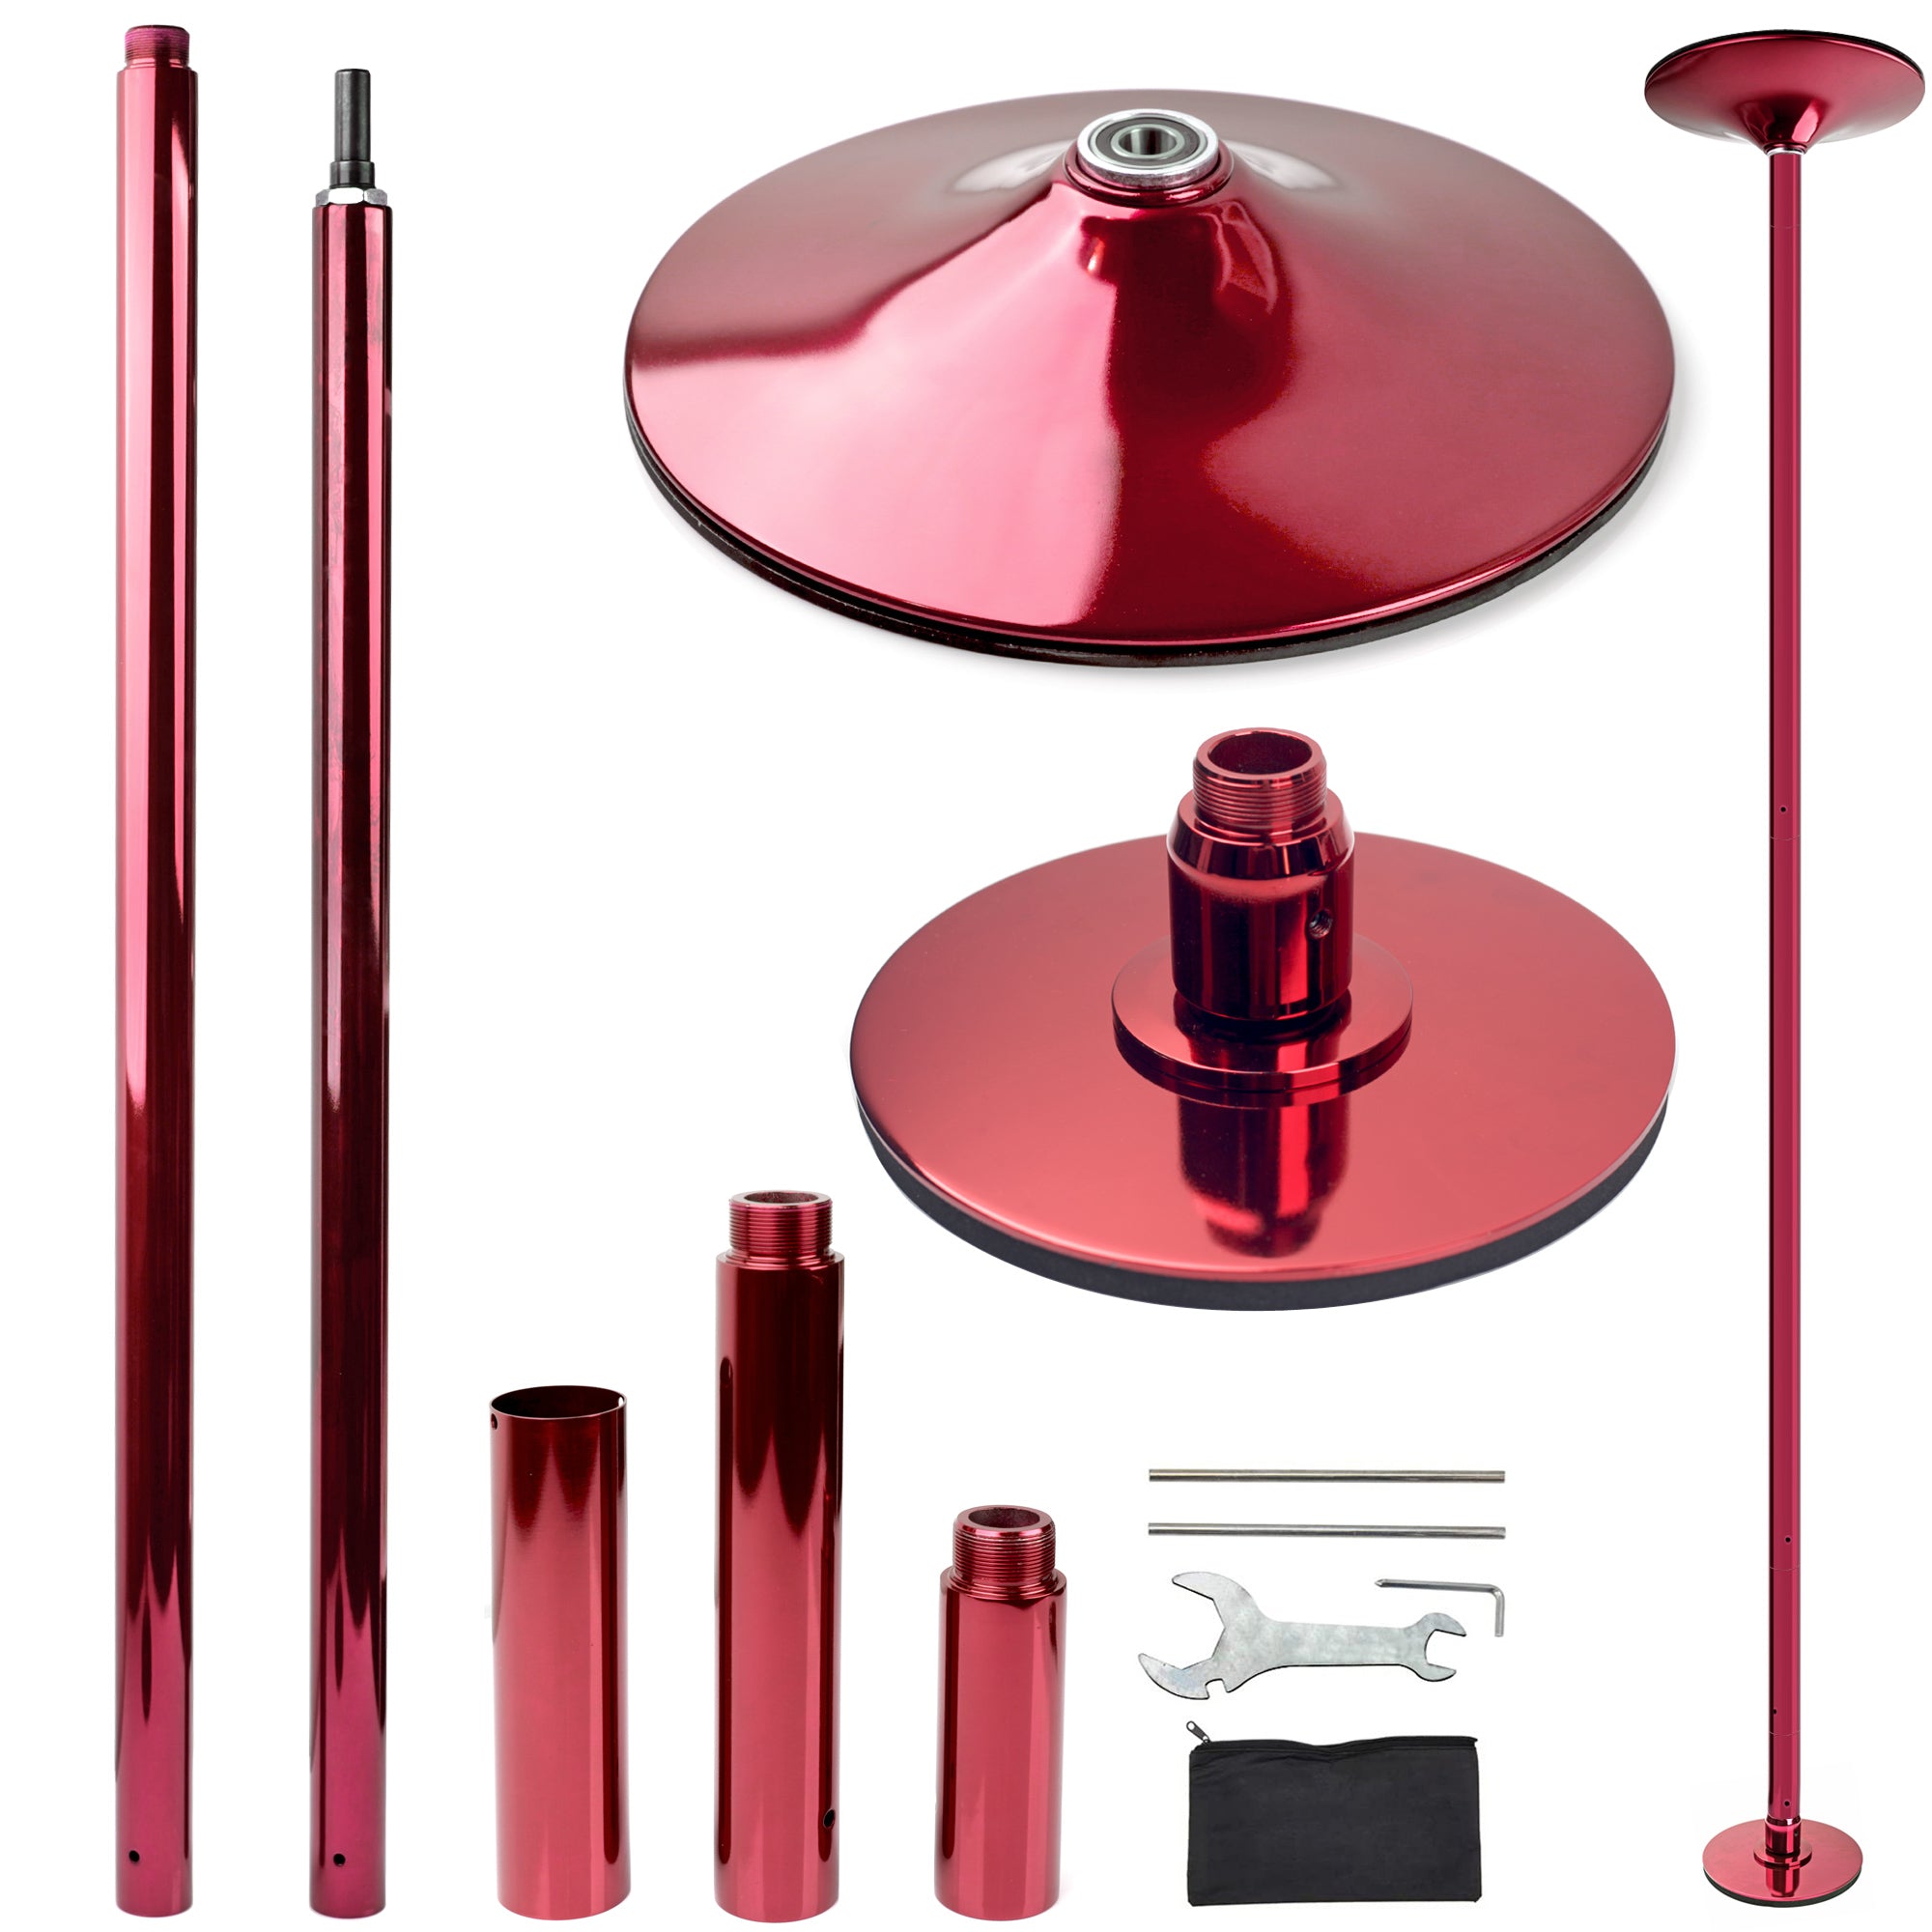  PRIORMAN Pole Extension For Pole Dancing 45mm - 125